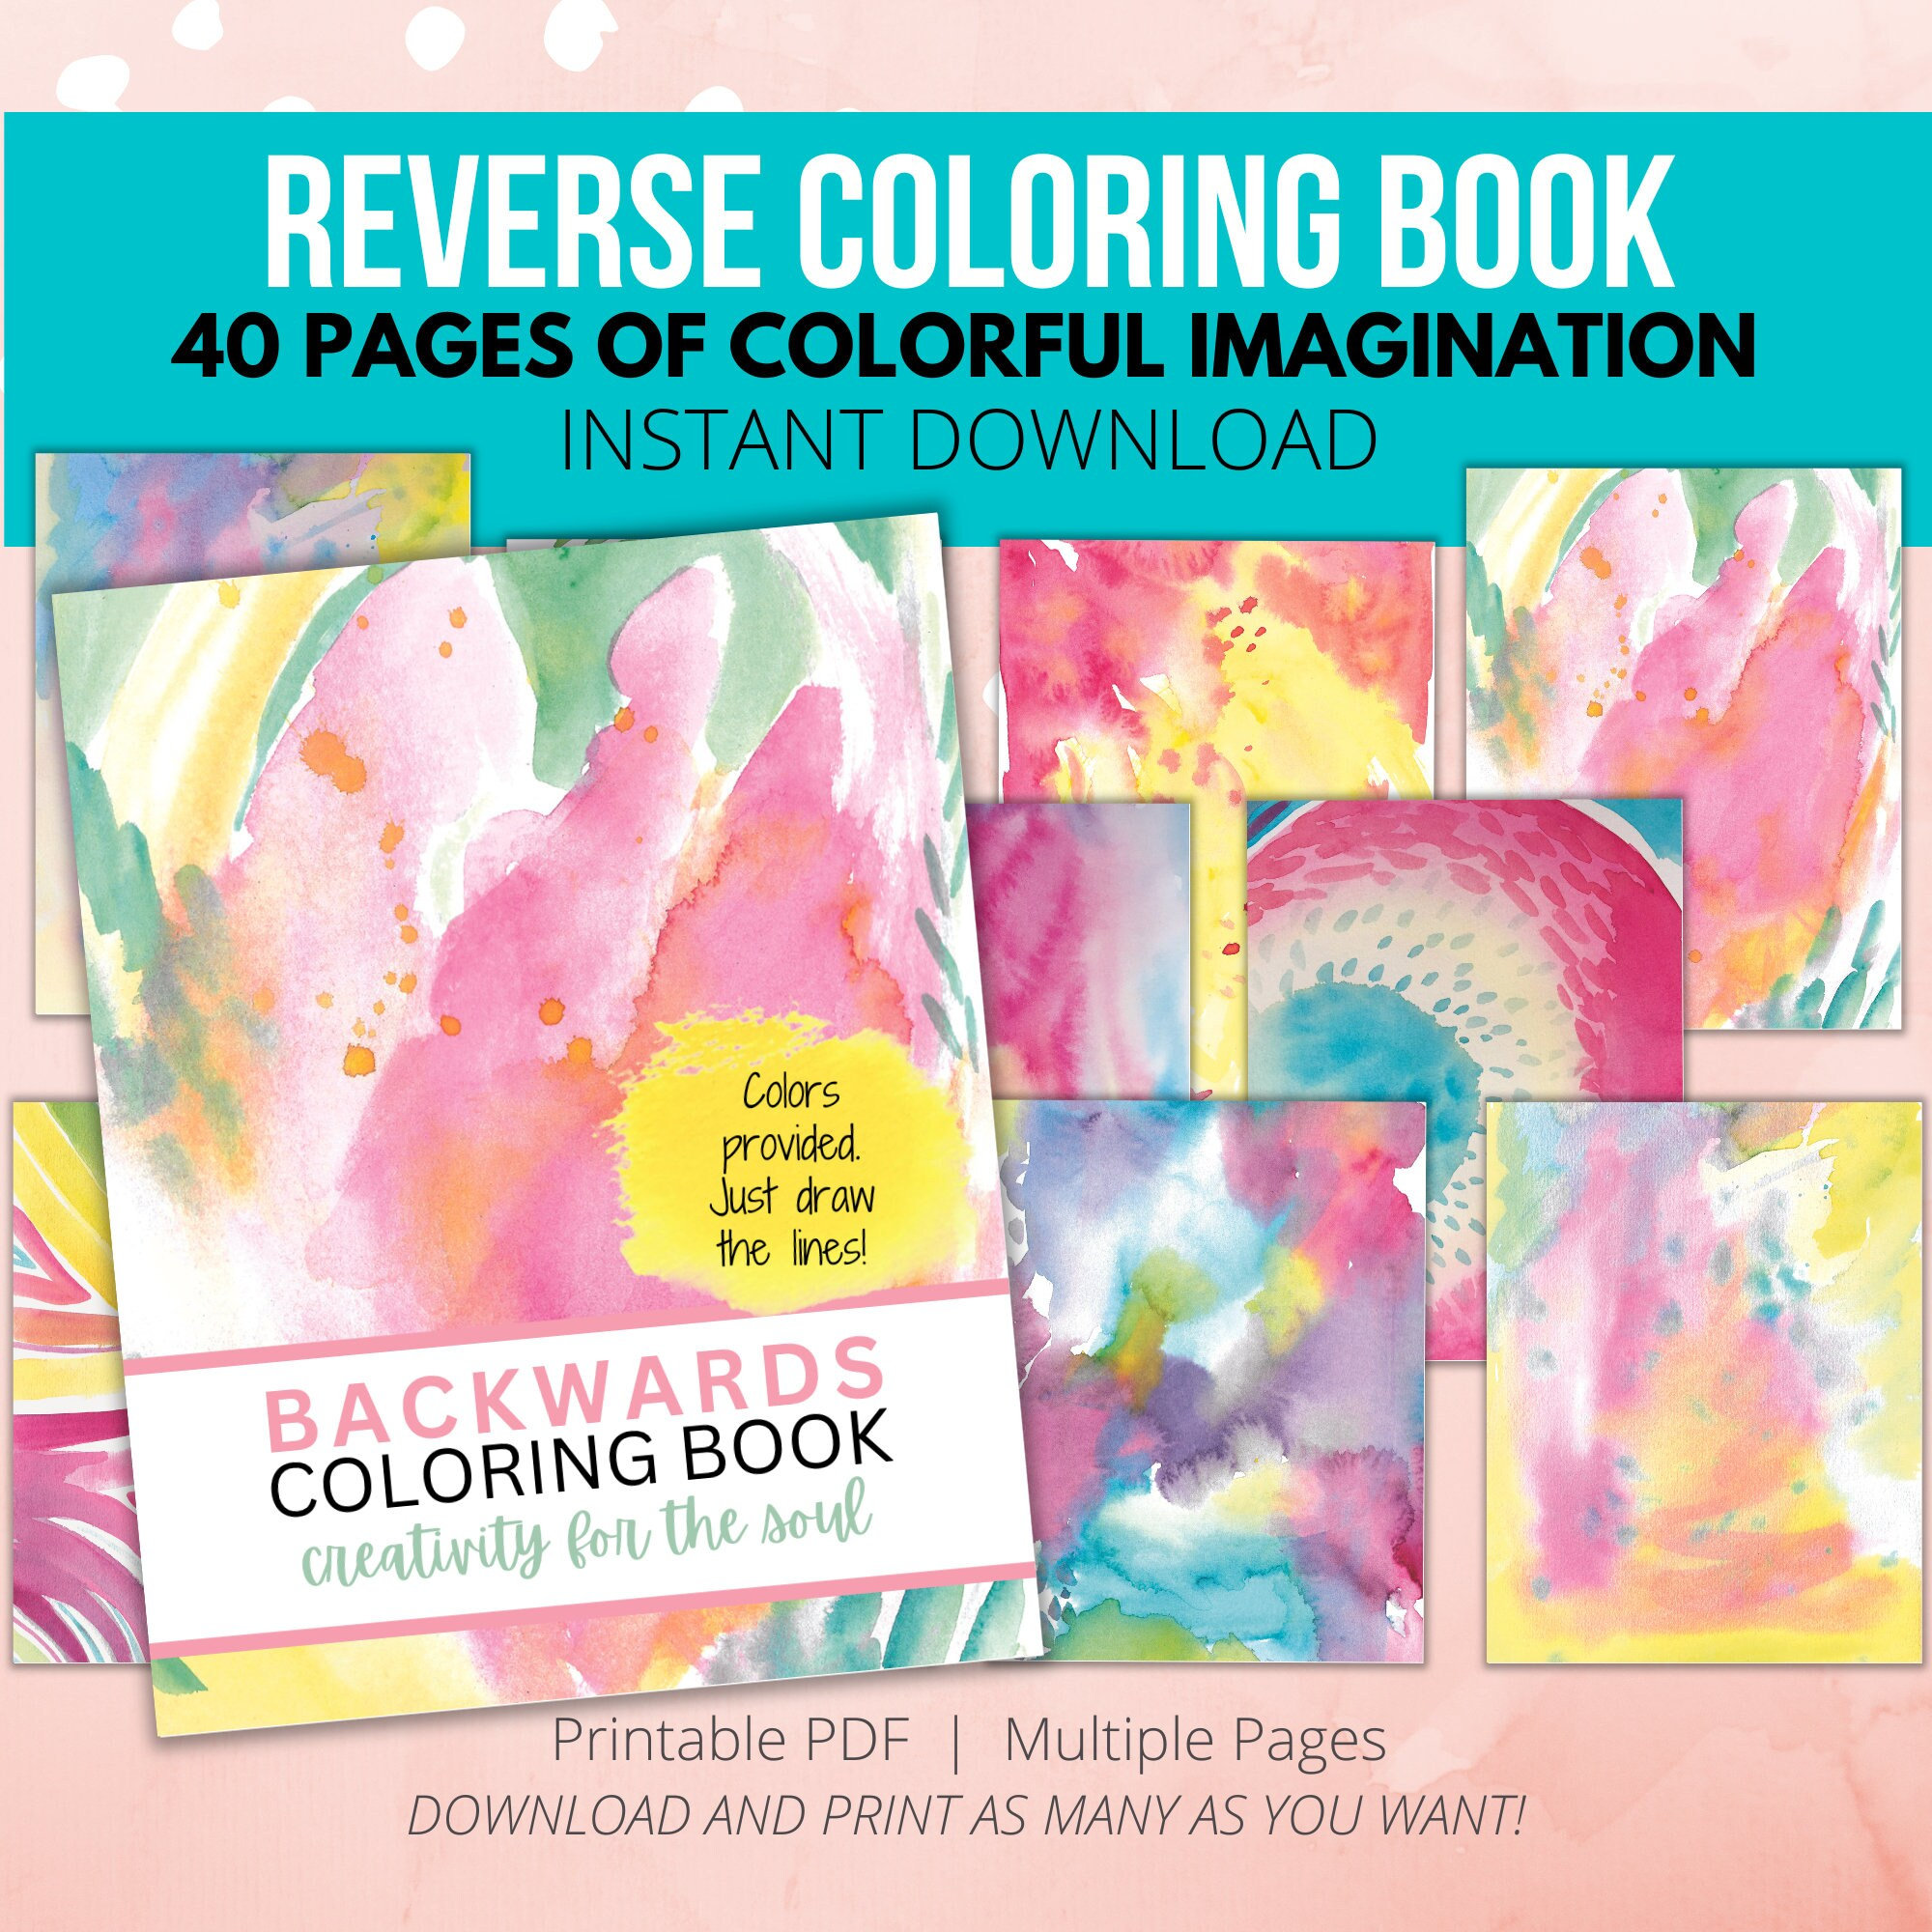 Color In Reverse Coloring Book Where You Draw The Lines On Colored Pages:  Stress & Anxiety Relief and Mindful Relaxation for Adults, Men, Women